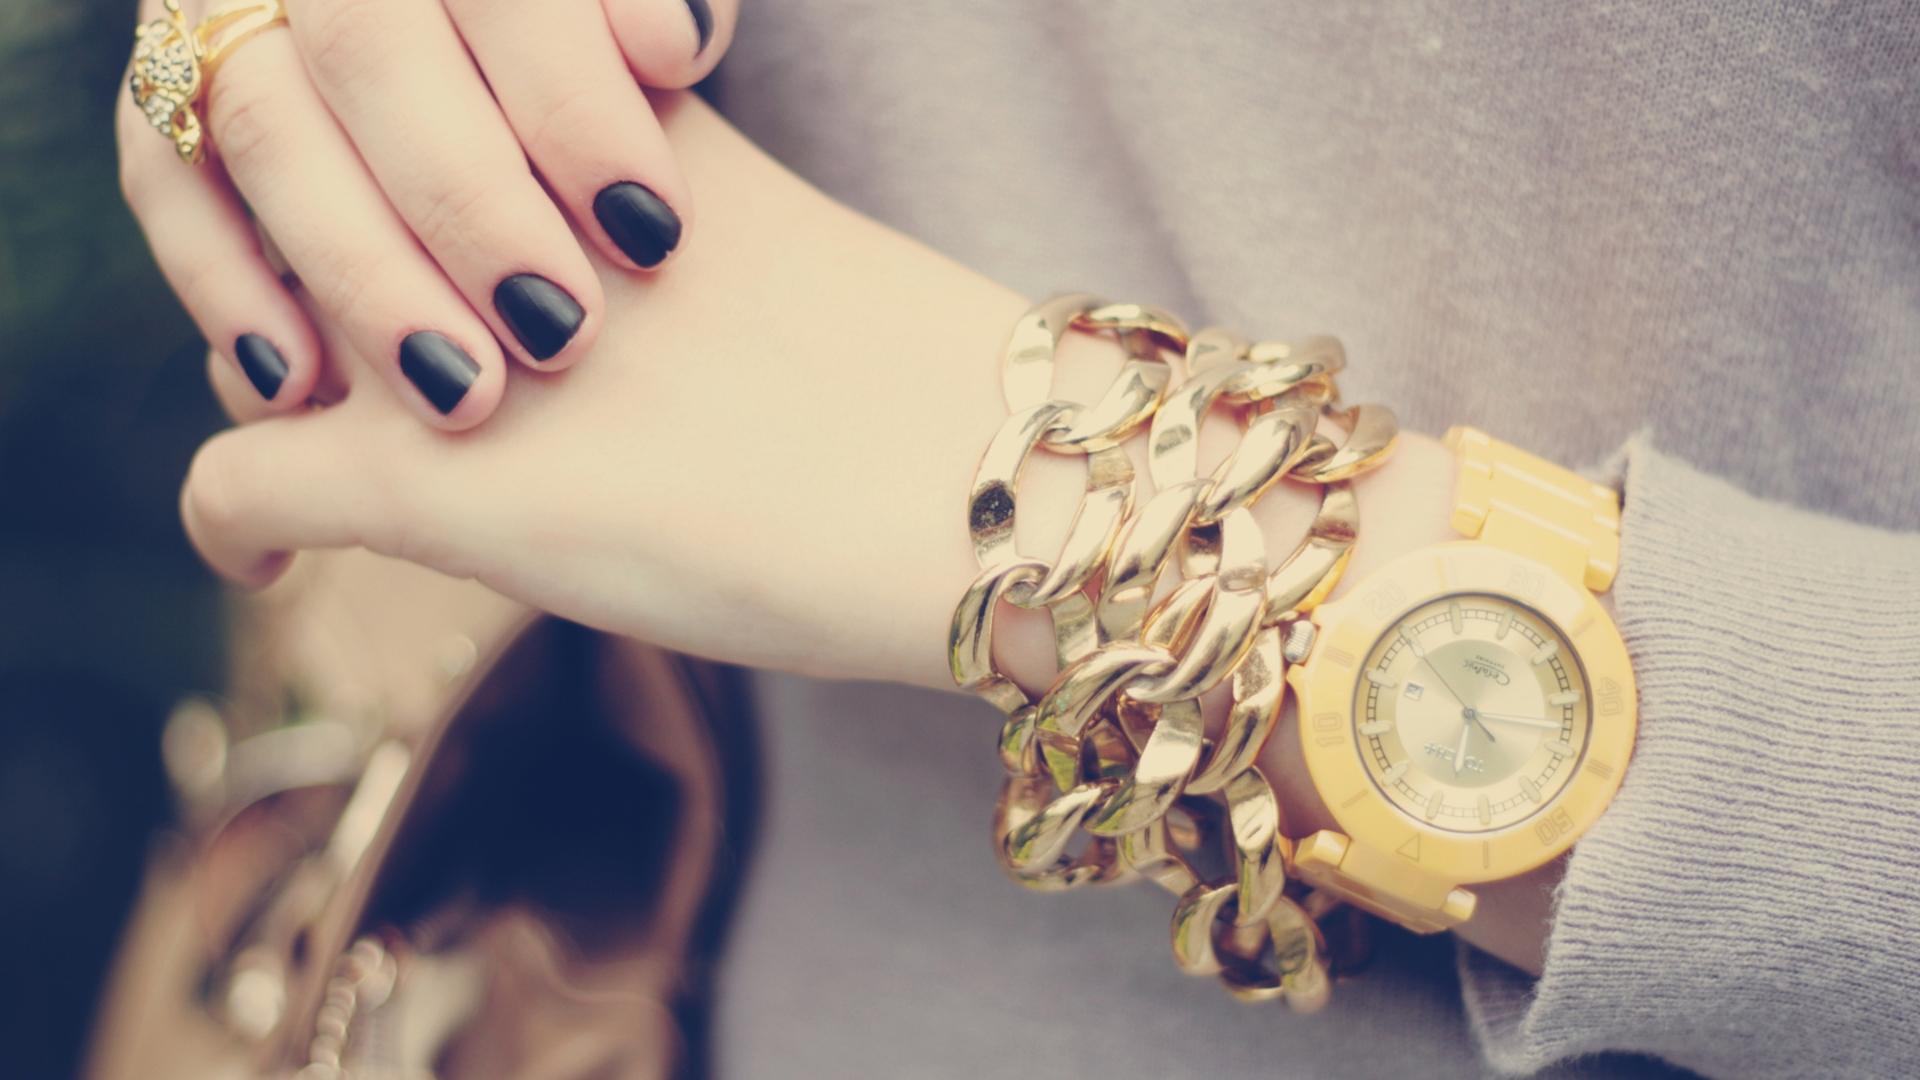 Wallpaper, hands, yellow, blue, jewelry, watches, girl, hand, nail, finger, ring, jewellery, fashion accessory, manicure 1920x1080